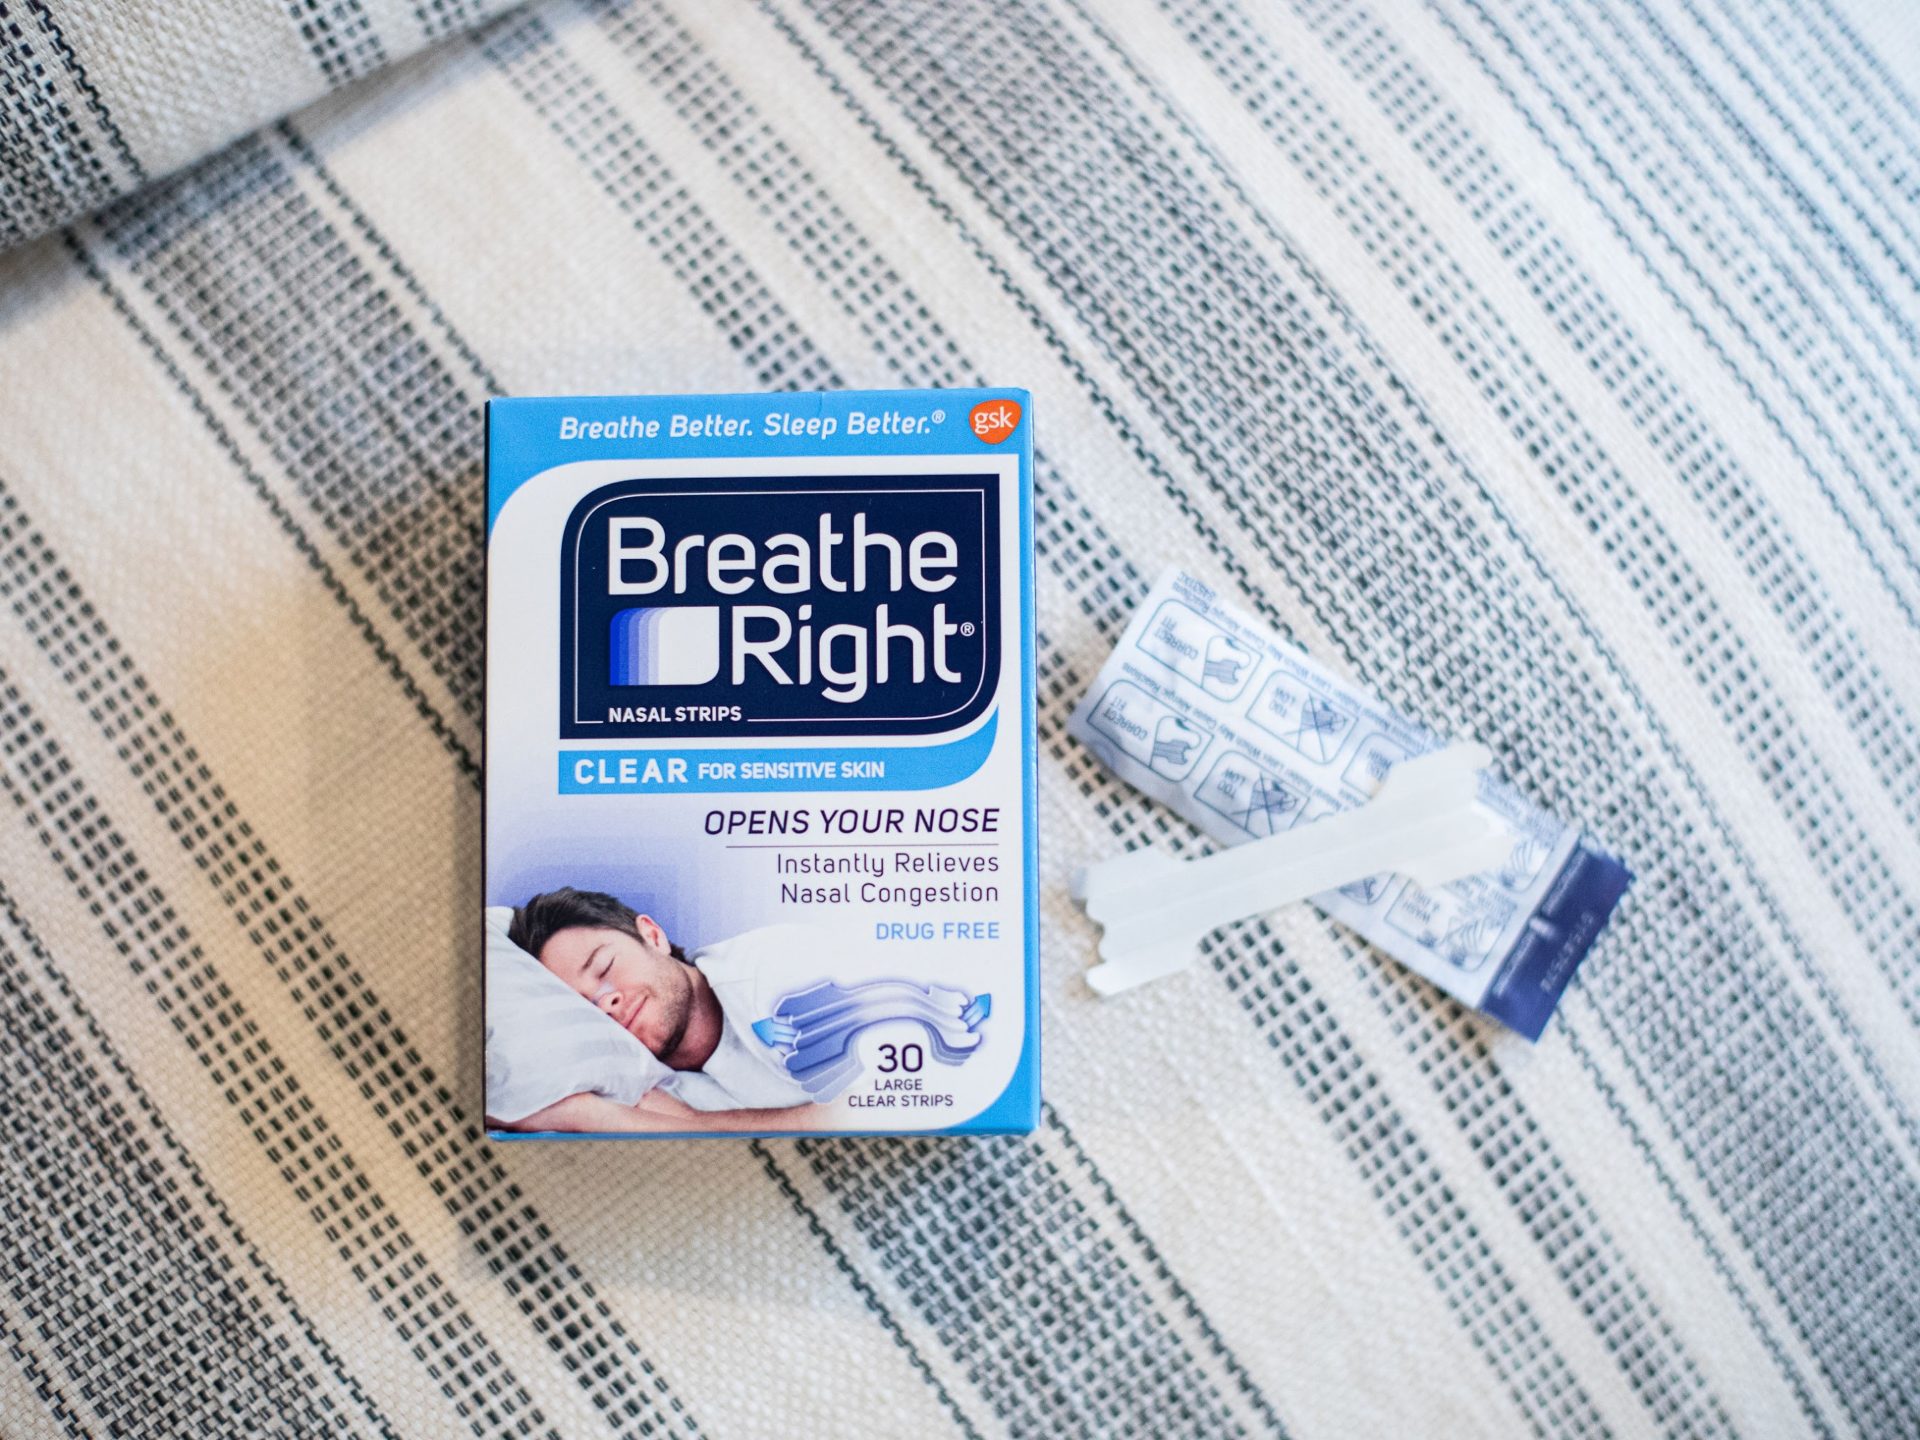 Breathe Right Nasal Strips As Low As $5.79 At Publix (Regular Price $12.79)